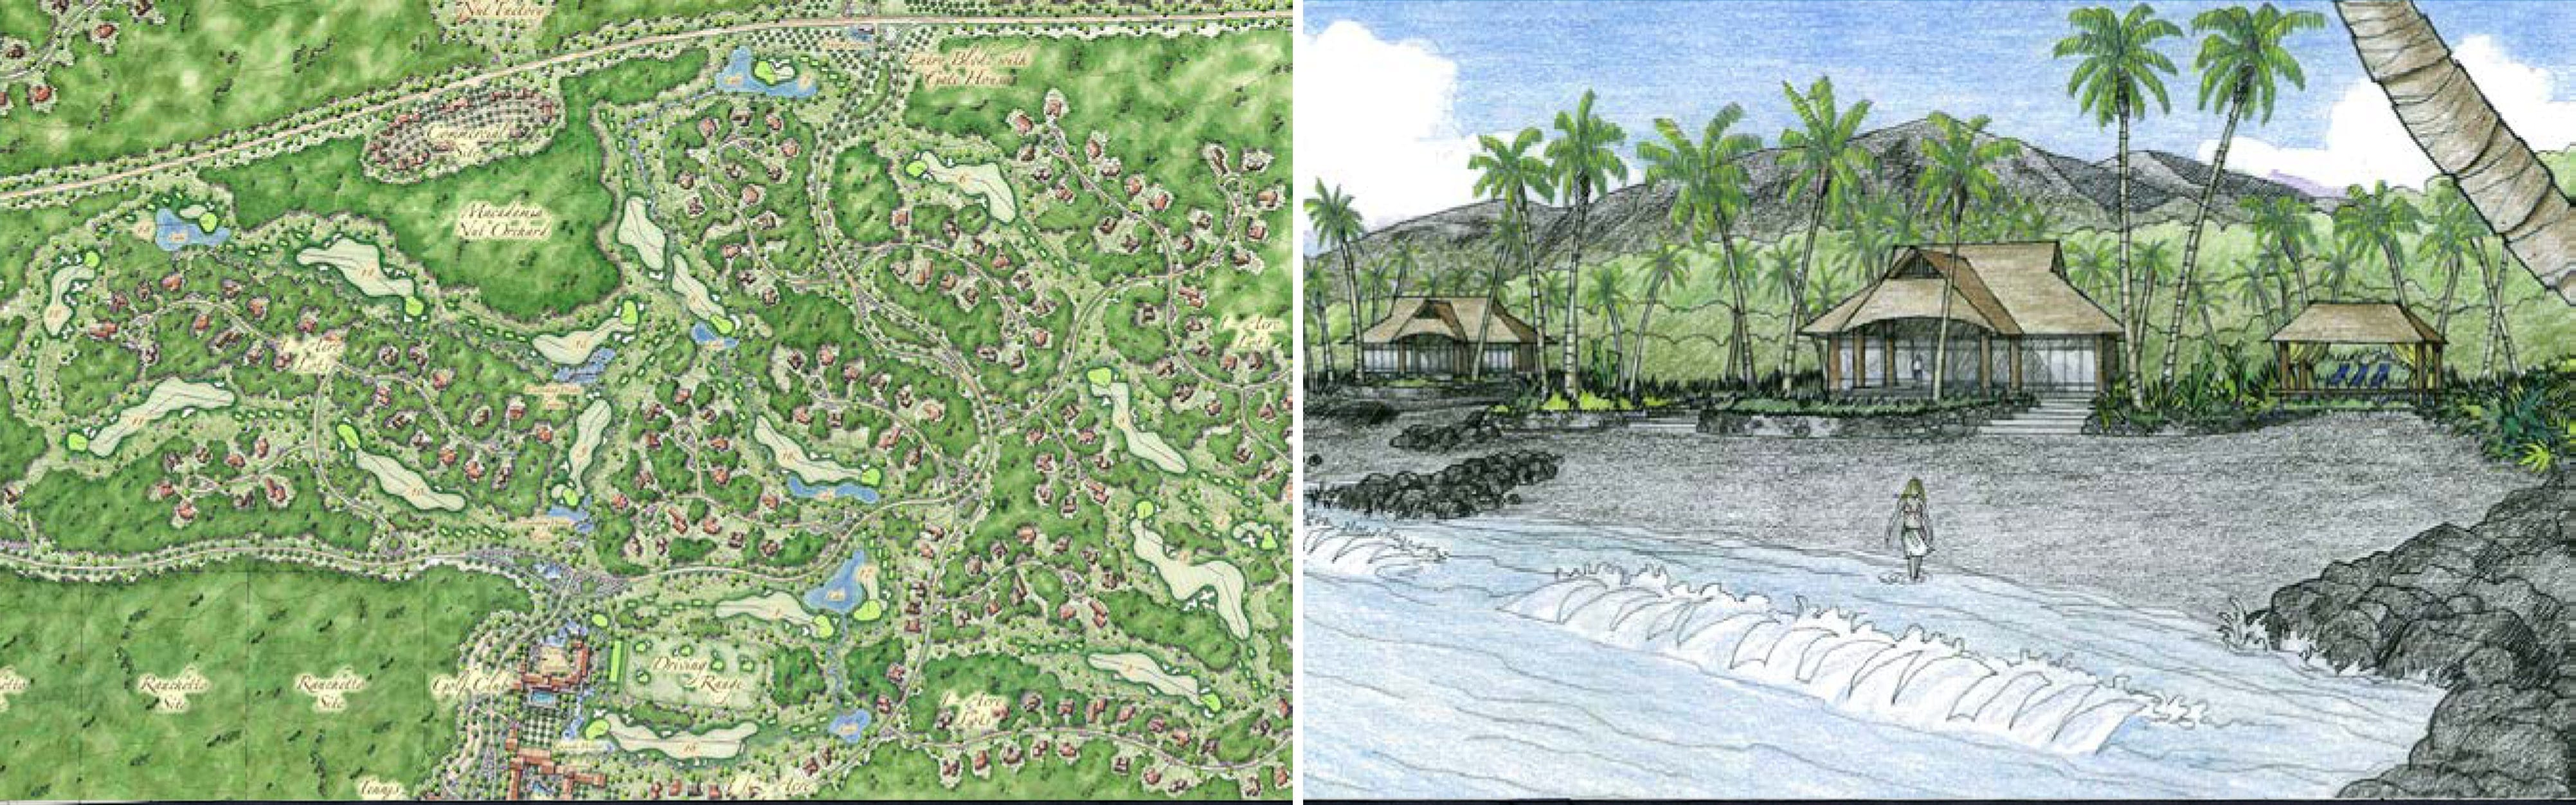 Master Planning Architecture Design In Captain Hook, Hawaii